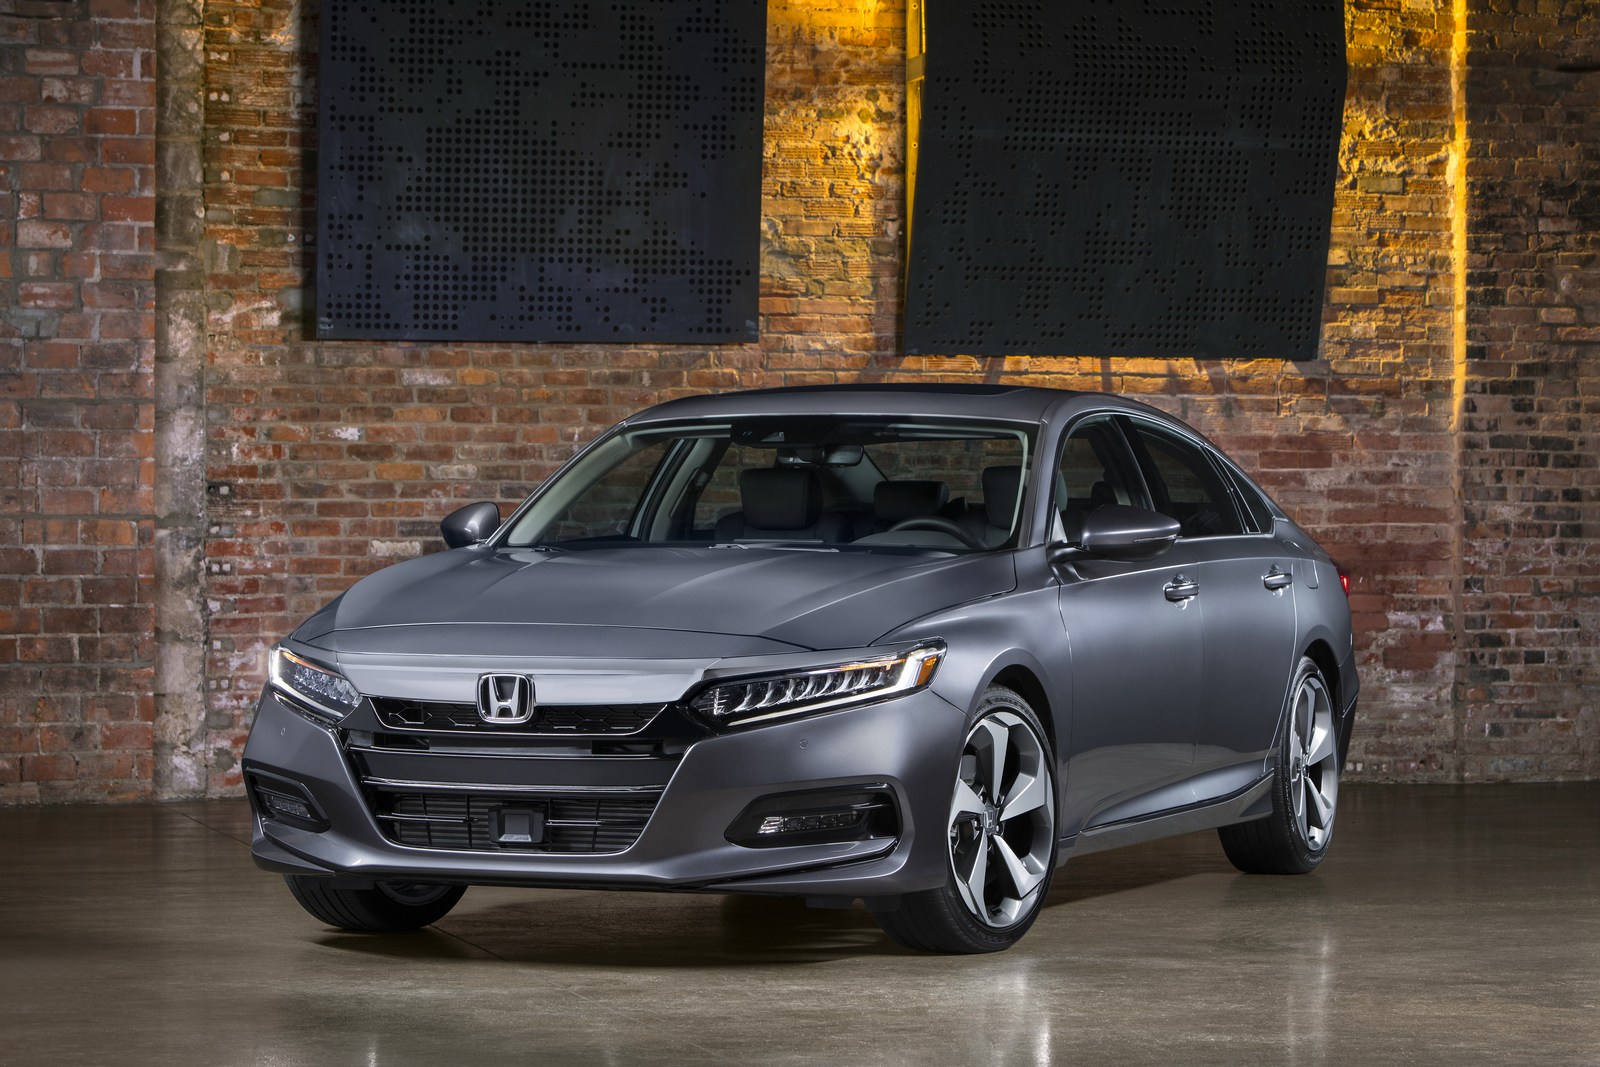 Honda Reveals The Redesigned 10th Generation Accord Model